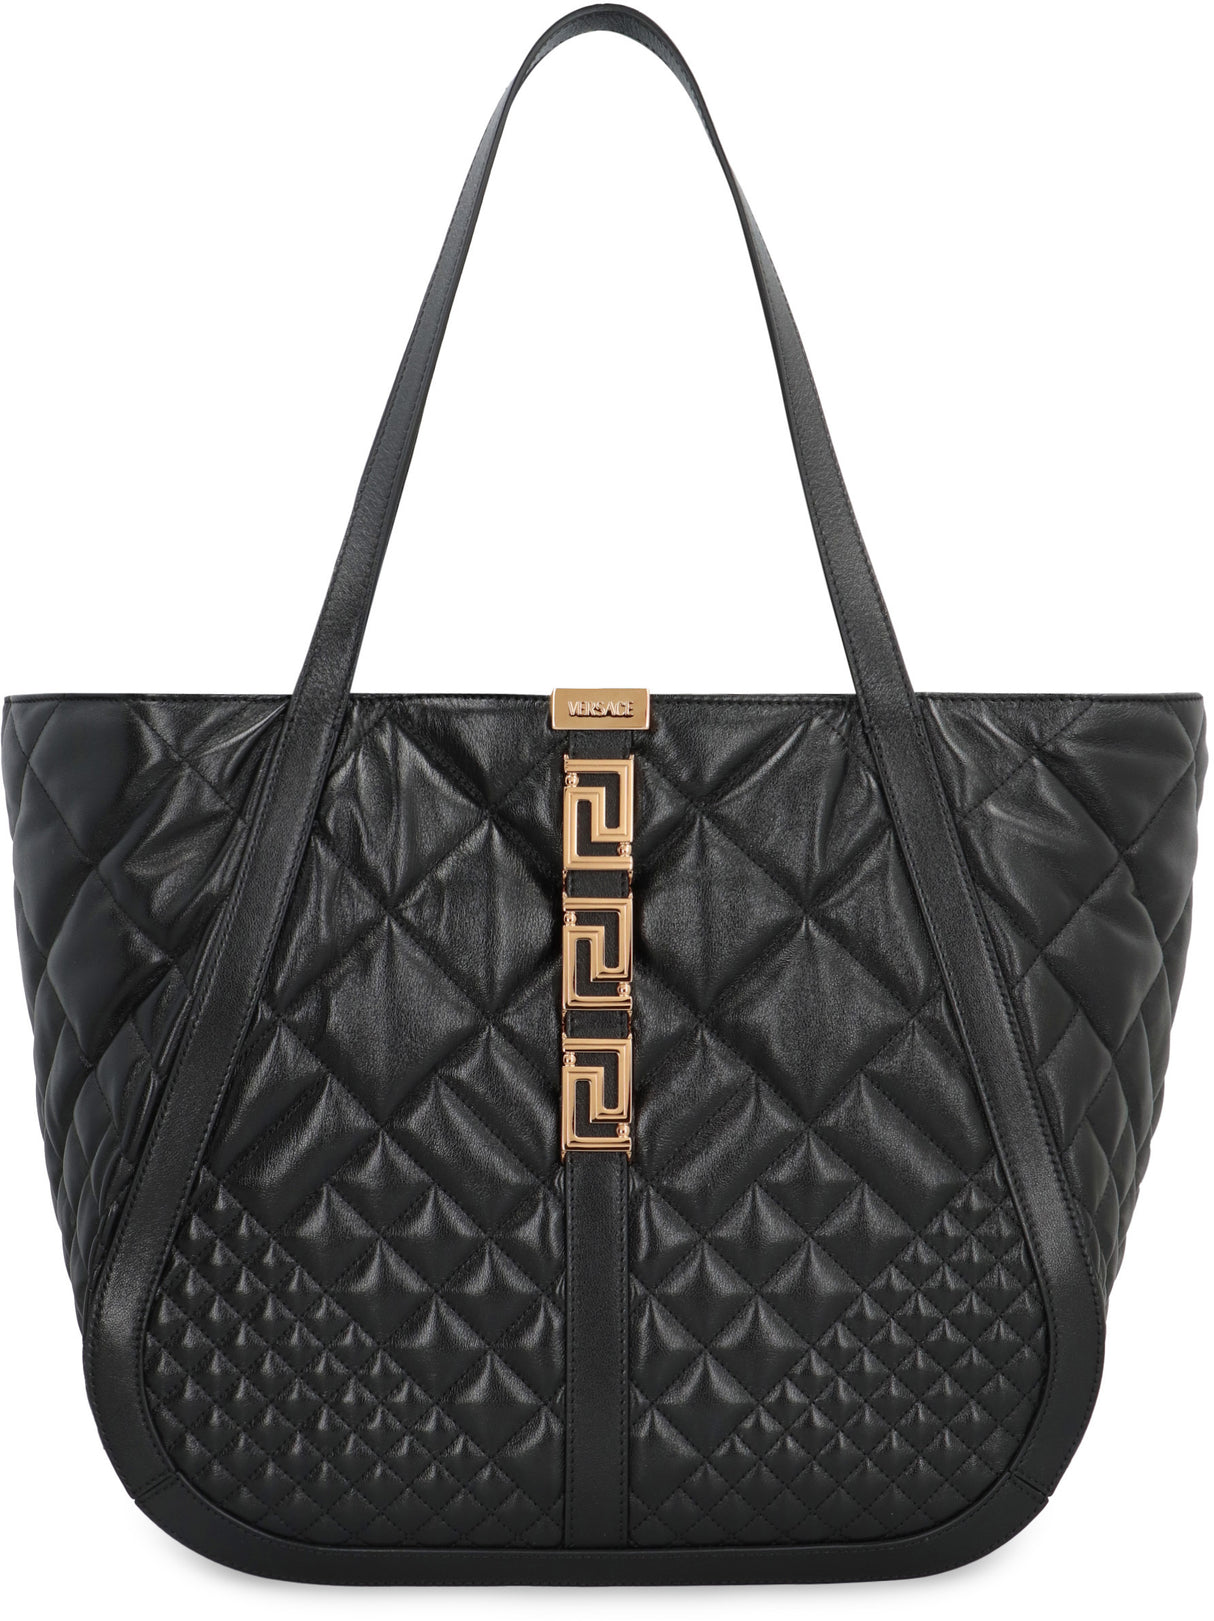 VERSACE Grecian Goddess Leather Tote Handbag - Quilted, Magnetic Fastening, Gold-Tone Hardware, Women's Fashion Accessory for FW23